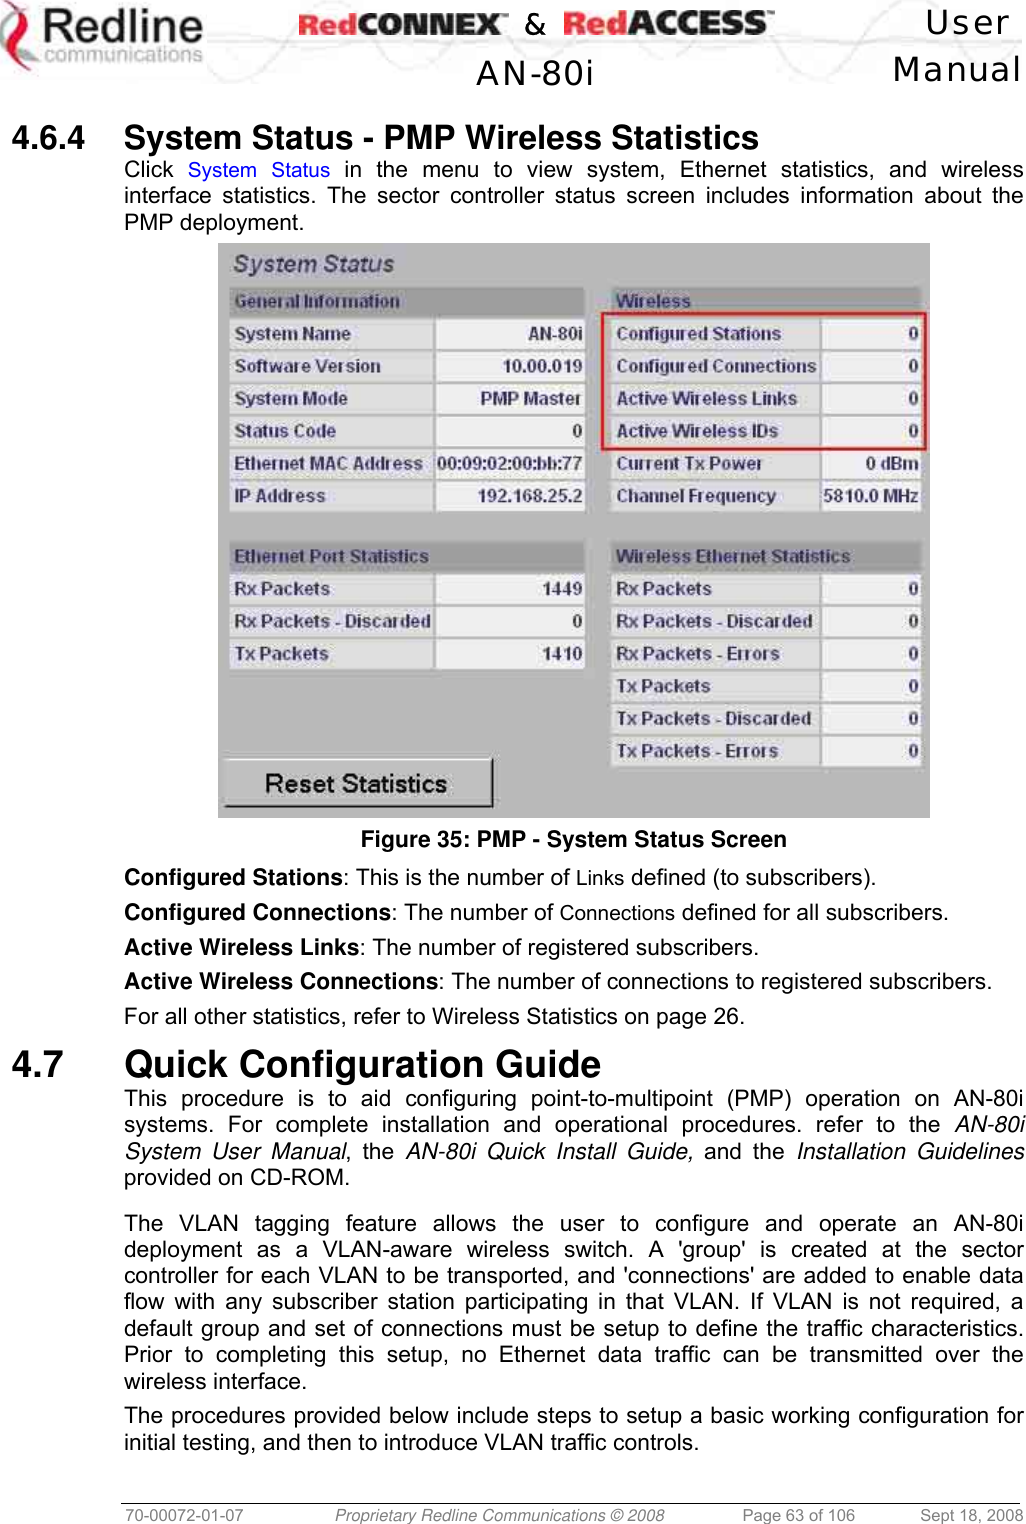    &amp;  User  AN-80i Manual  70-00072-01-07  Proprietary Redline Communications © 2008  Page 63 of 106  Sept 18, 2008  4.6.4  System Status - PMP Wireless Statistics Click  System Status in the menu to view system, Ethernet statistics, and wireless interface statistics. The sector controller status screen includes information about the PMP deployment.  Figure 35: PMP - System Status Screen Configured Stations: This is the number of Links defined (to subscribers). Configured Connections: The number of Connections defined for all subscribers. Active Wireless Links: The number of registered subscribers. Active Wireless Connections: The number of connections to registered subscribers. For all other statistics, refer to Wireless Statistics on page 26.  4.7 Quick Configuration Guide This procedure is to aid configuring point-to-multipoint (PMP) operation on AN-80i systems. For complete installation and operational procedures. refer to the AN-80i System User Manual, the AN-80i Quick Install Guide, and the Installation Guidelines provided on CD-ROM.  The VLAN tagging feature allows the user to configure and operate an AN-80i deployment as a VLAN-aware wireless switch. A &apos;group&apos; is created at the sector controller for each VLAN to be transported, and &apos;connections&apos; are added to enable data flow with any subscriber station participating in that VLAN. If VLAN is not required, a default group and set of connections must be setup to define the traffic characteristics. Prior to completing this setup, no Ethernet data traffic can be transmitted over the wireless interface. The procedures provided below include steps to setup a basic working configuration for initial testing, and then to introduce VLAN traffic controls.  